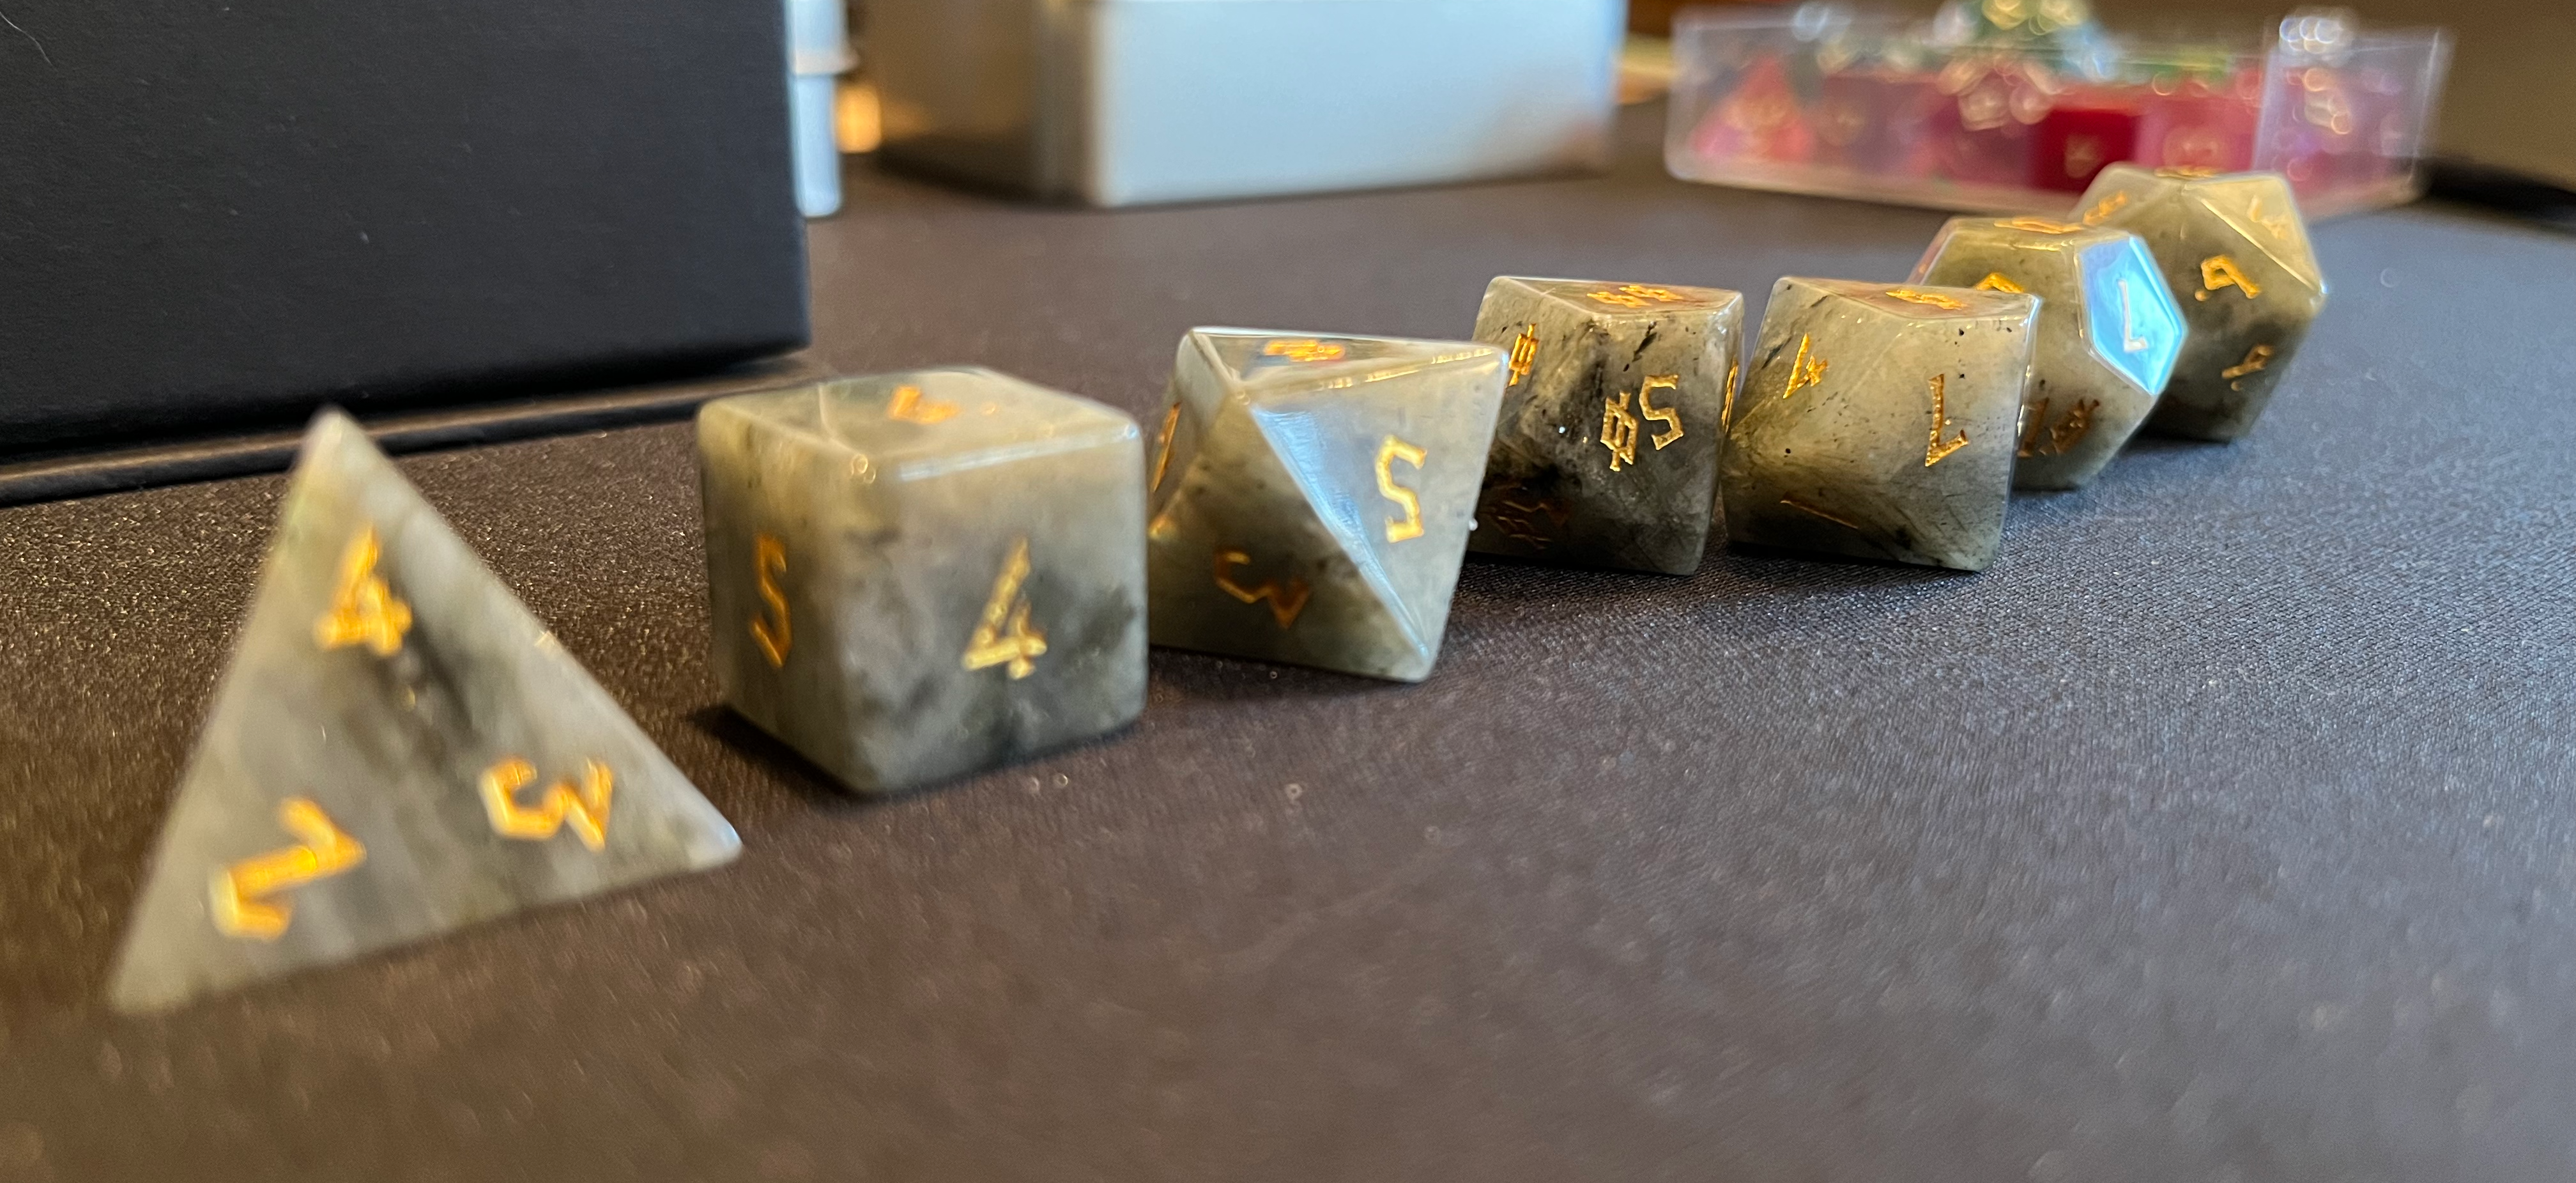 The same moonstone dice as before, from the front.